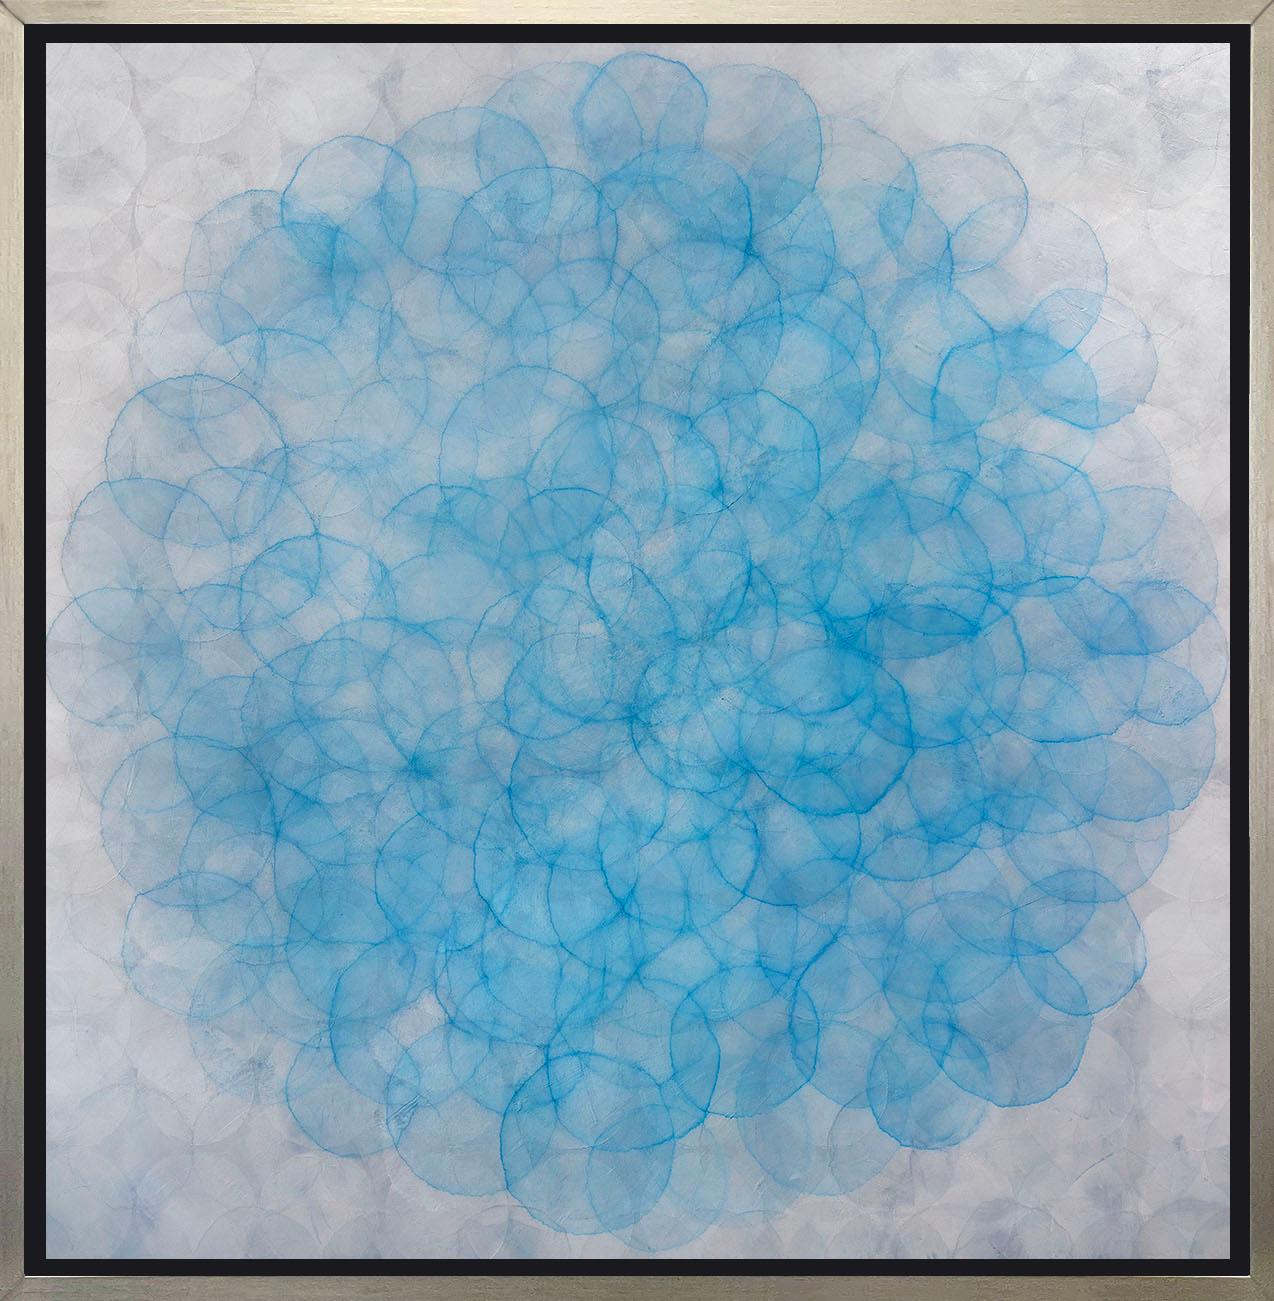 This abstract limited edition print by Roger Mudre features light circle shapes, layered over one another in a concentric fashion and a cool blue and silvery grey palette. This Limited Edition giclee print is an edition size of 25. Printed on